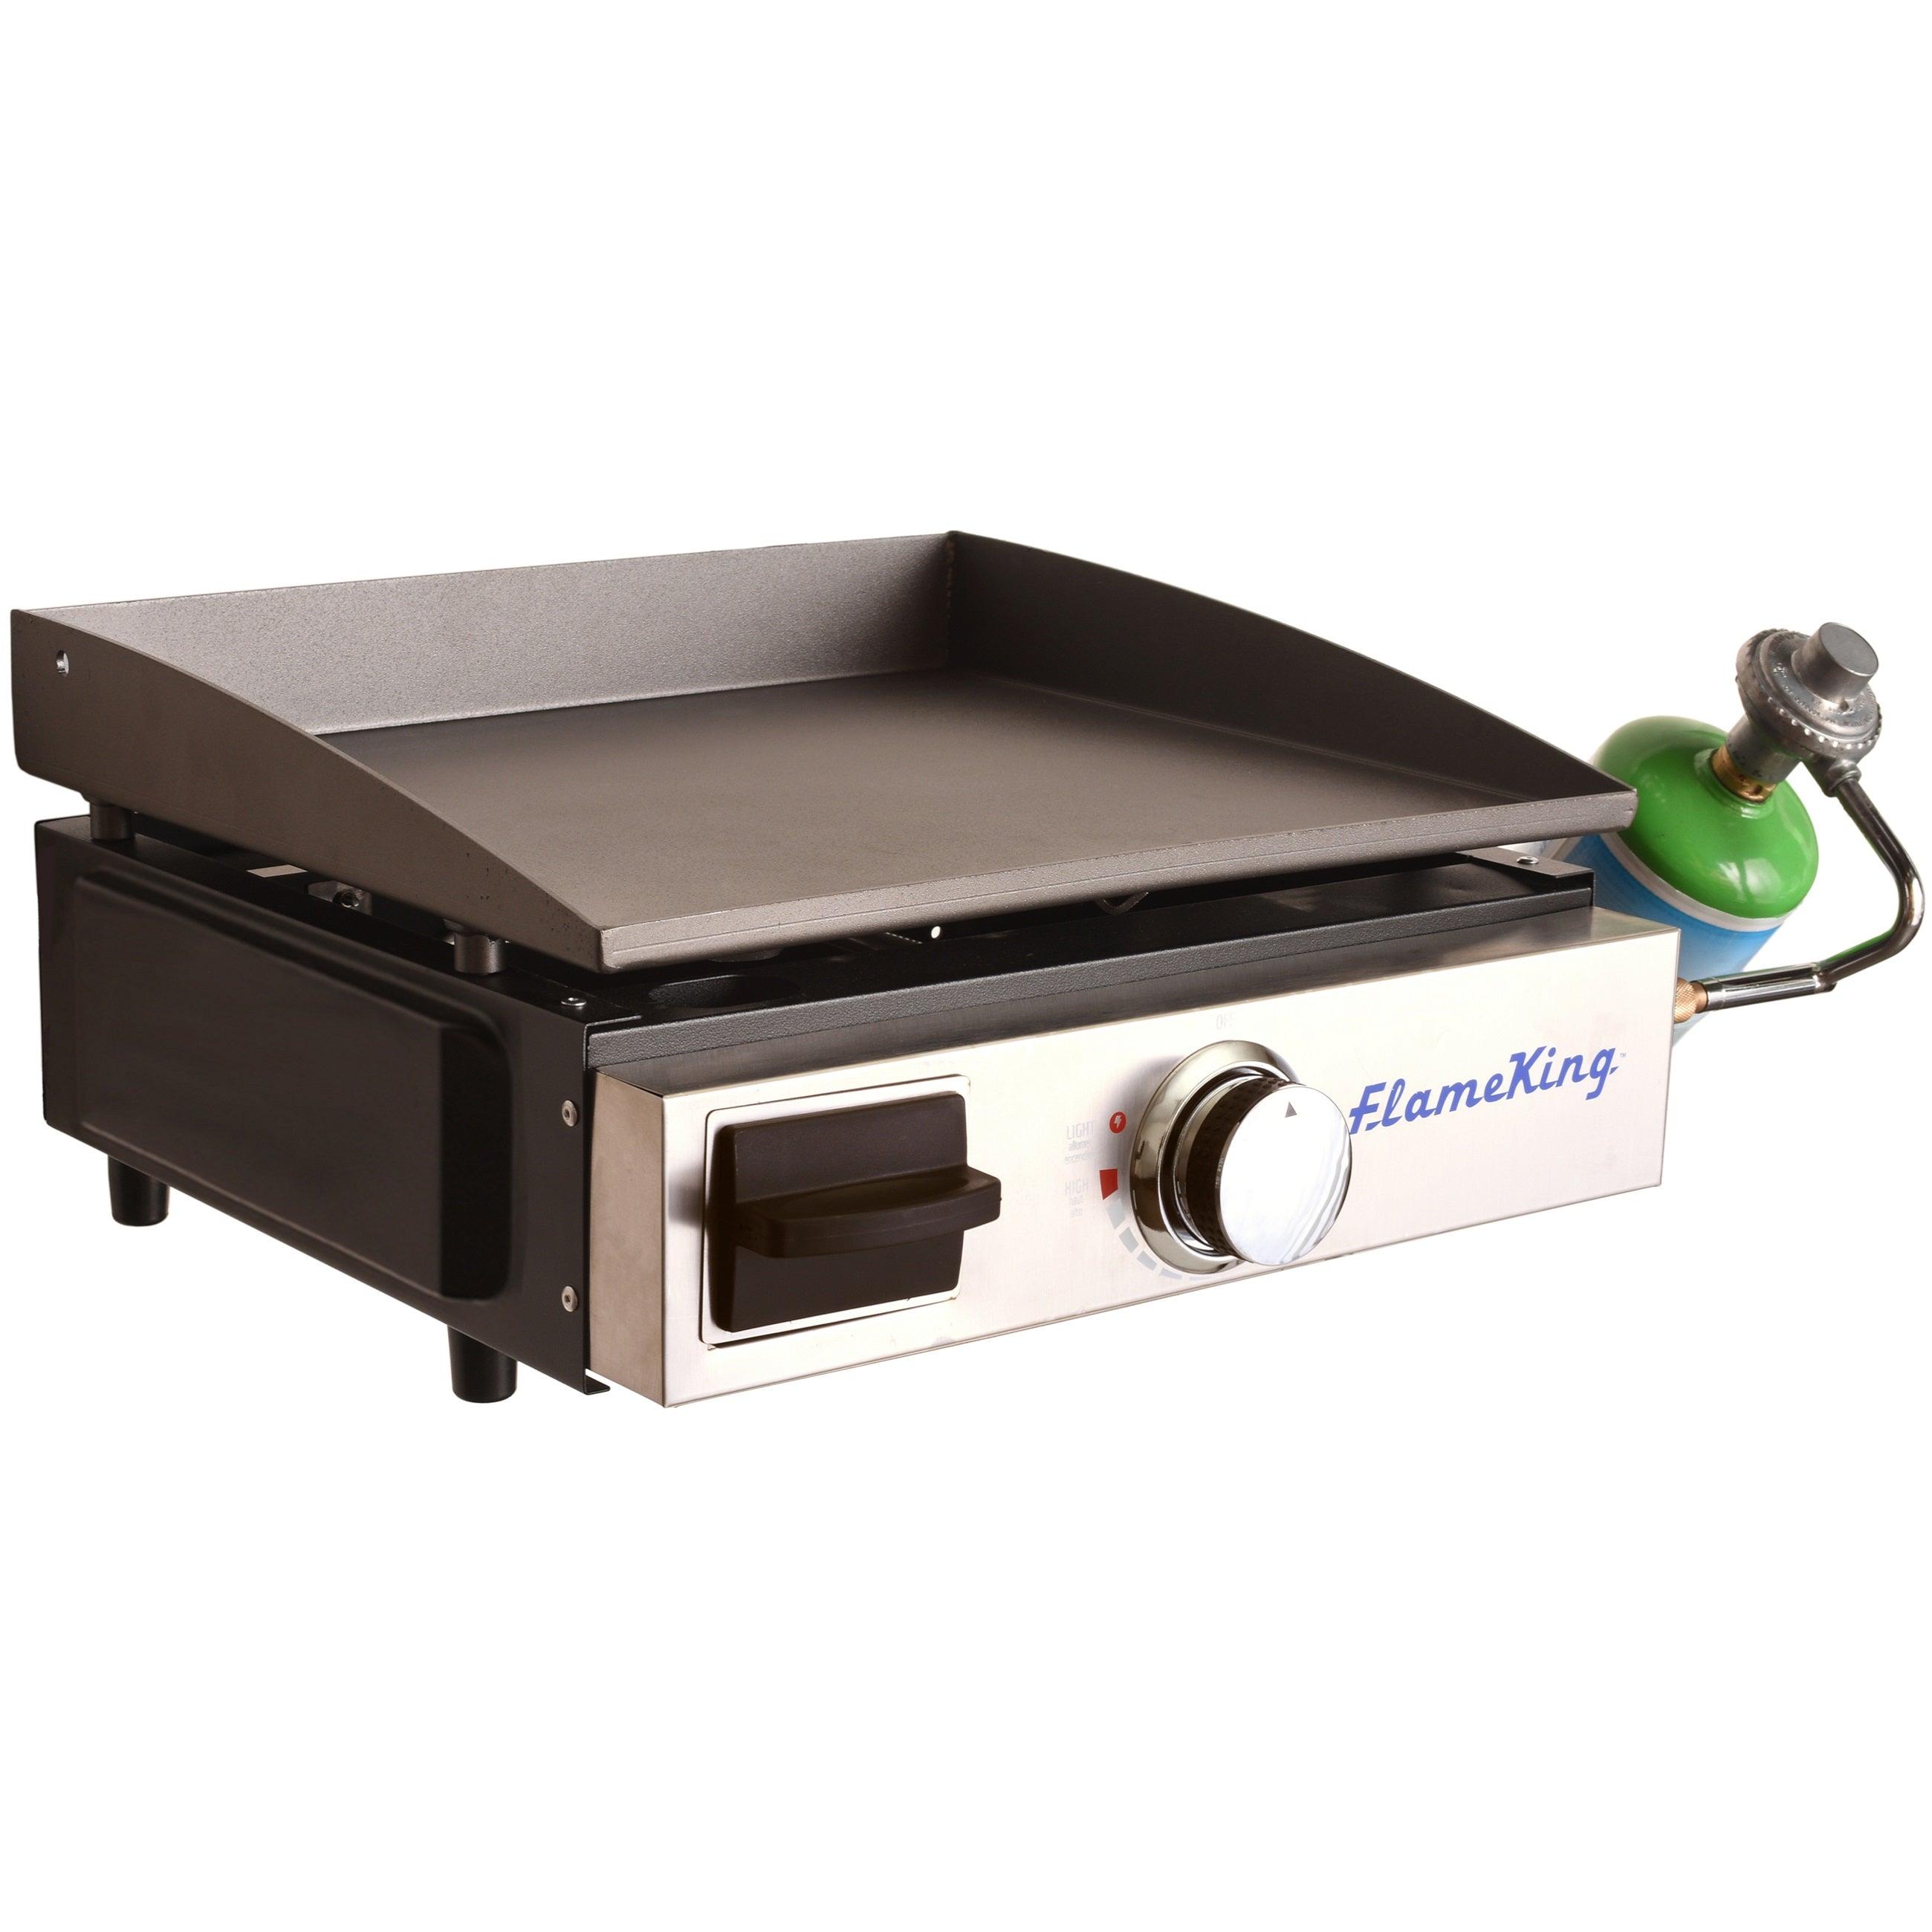 Flame King Flat Top Portable Propane Cast Iron Grill Griddle No Bracket - Flame King